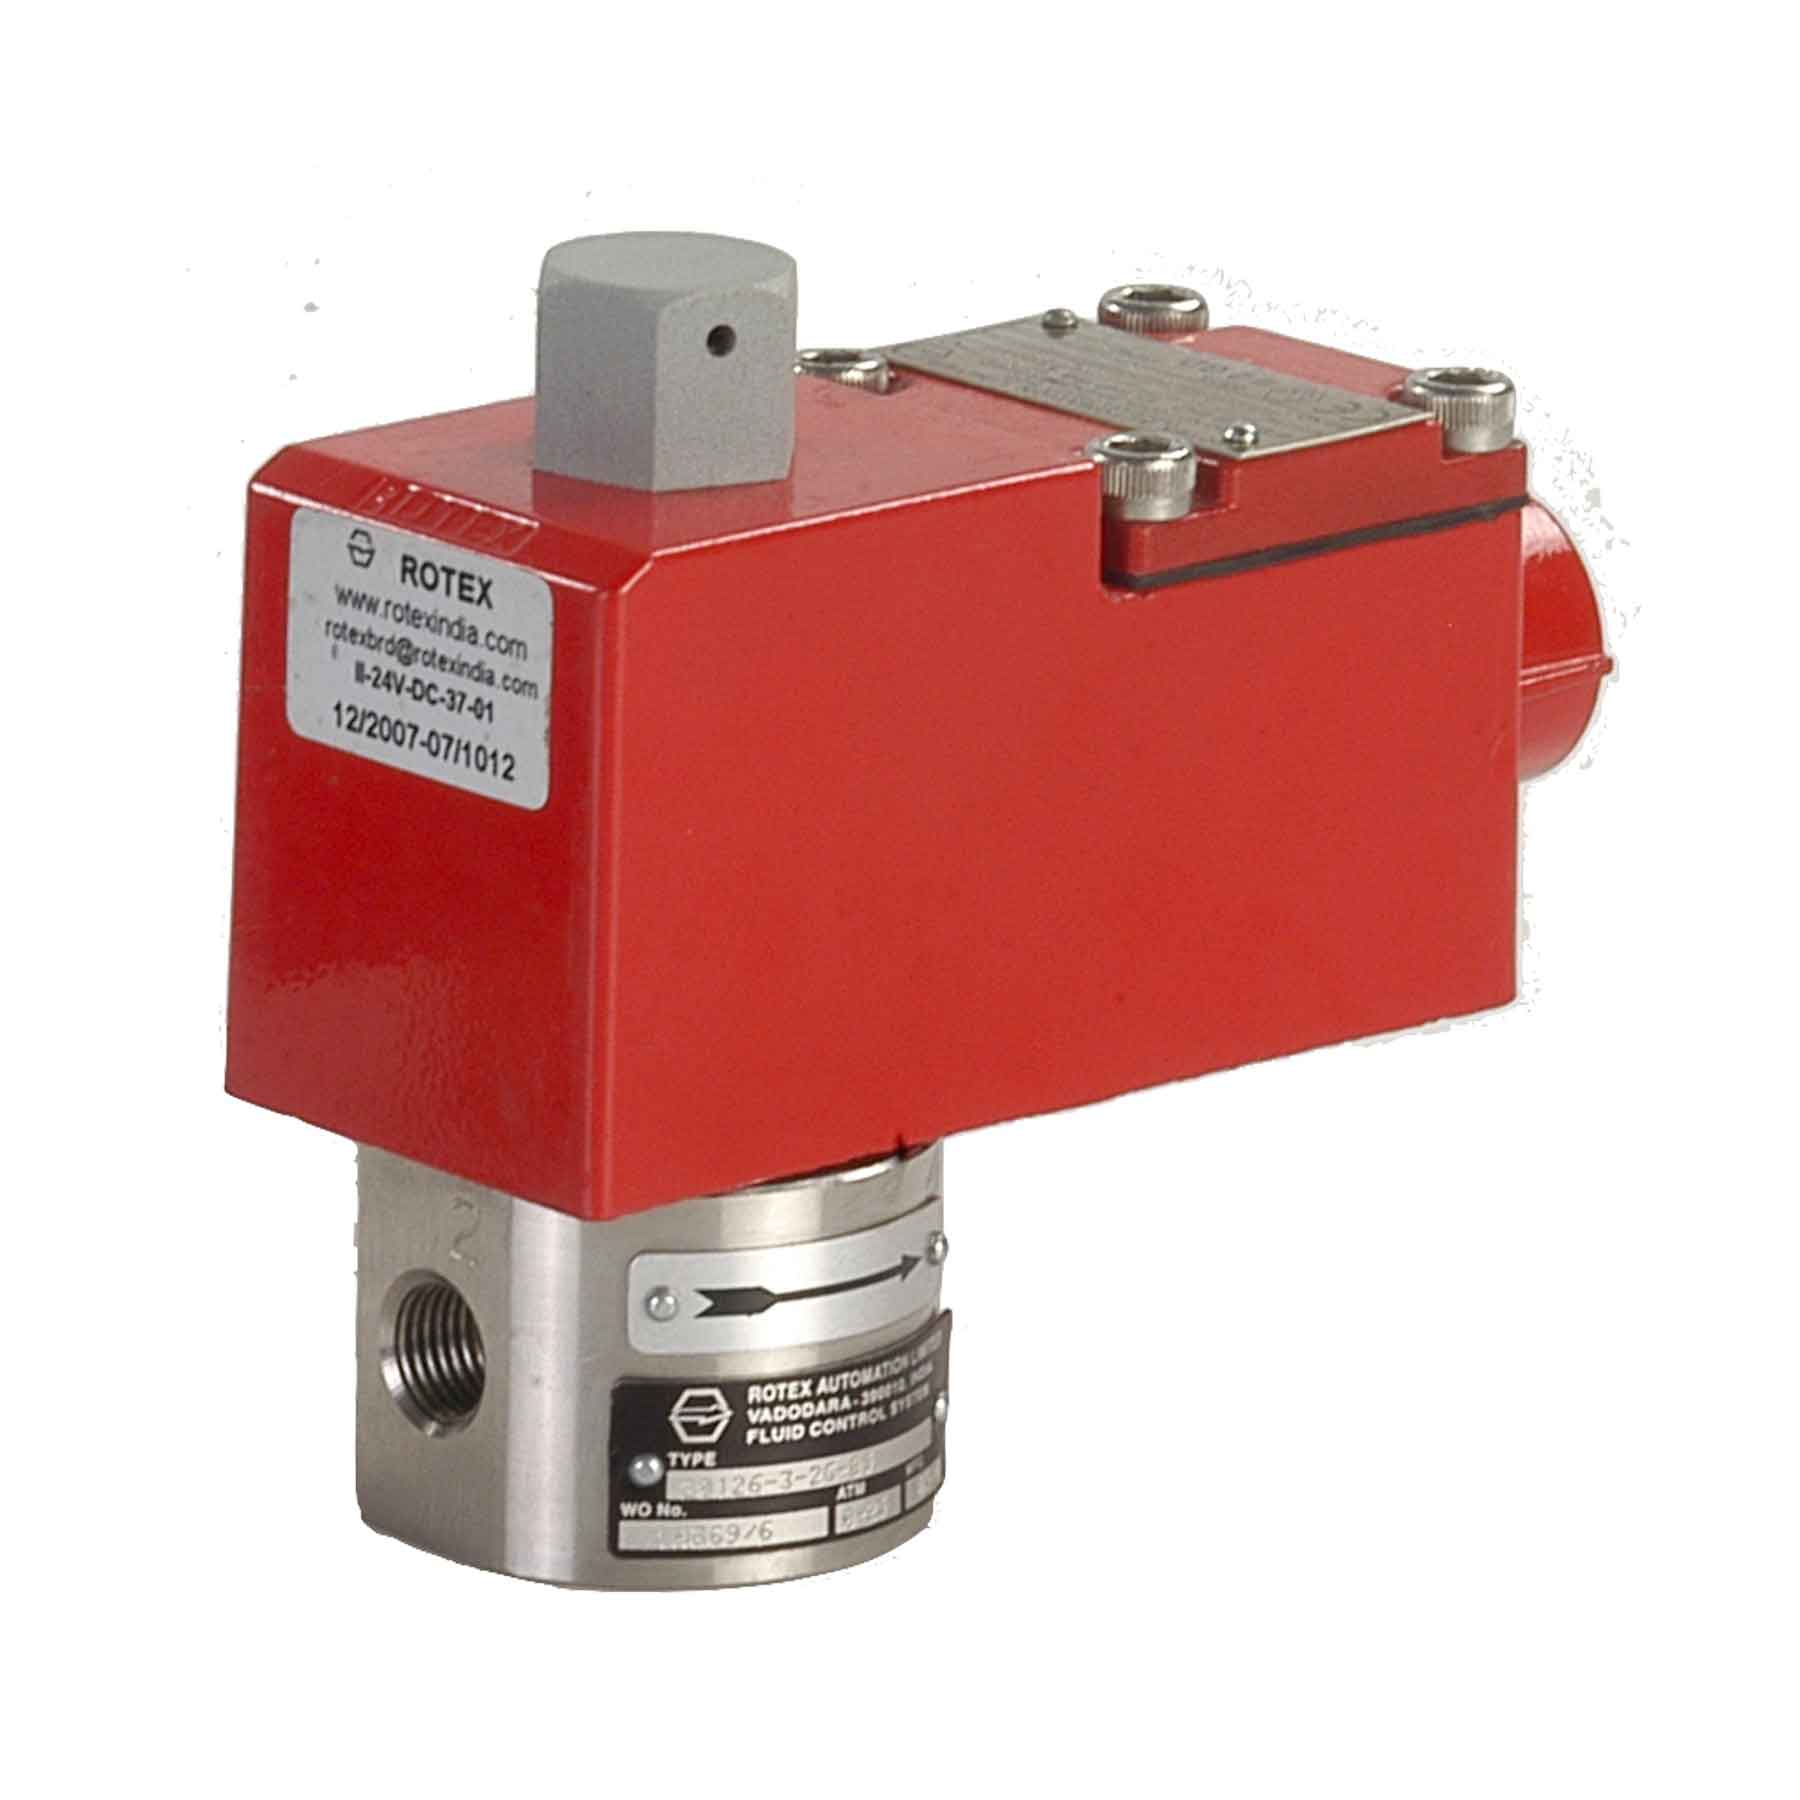 Rotex 3/2-Way Normally Closed Direct Lift Solenoid Valve 30125-1.8-2G+I-24V-DC-37-H-01